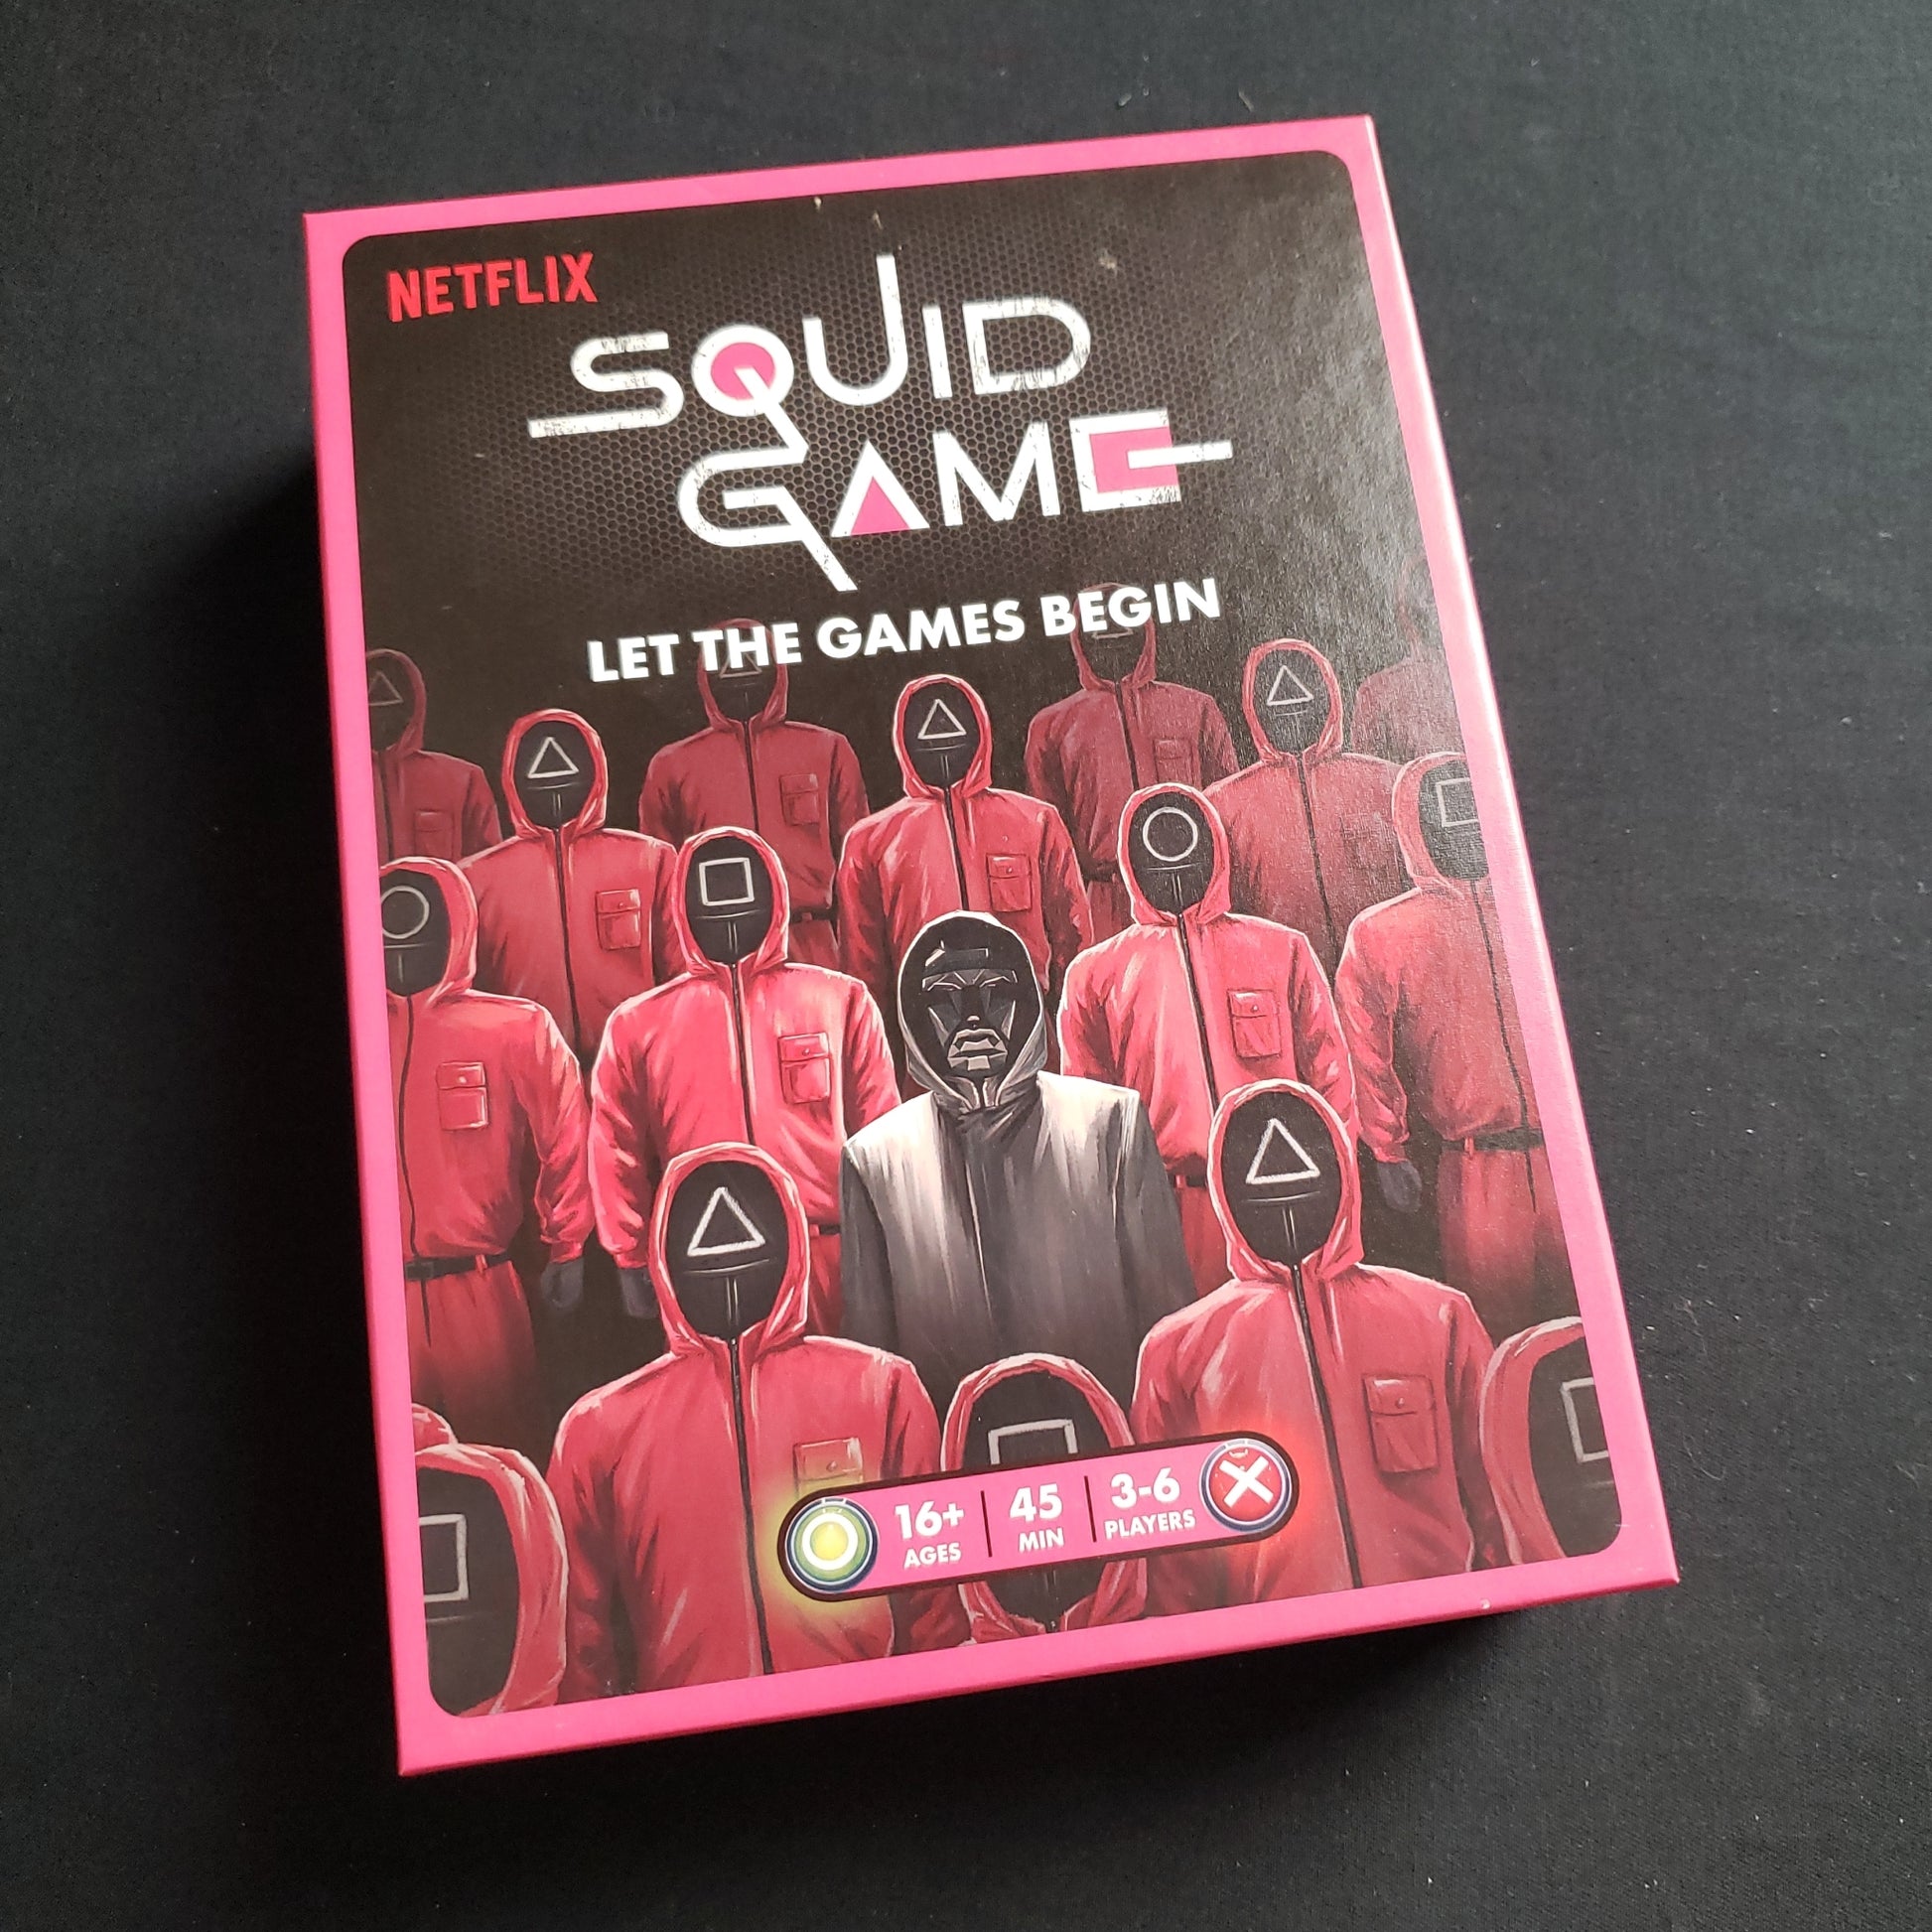 Image shows the front cover of the box of the Squid Game board game